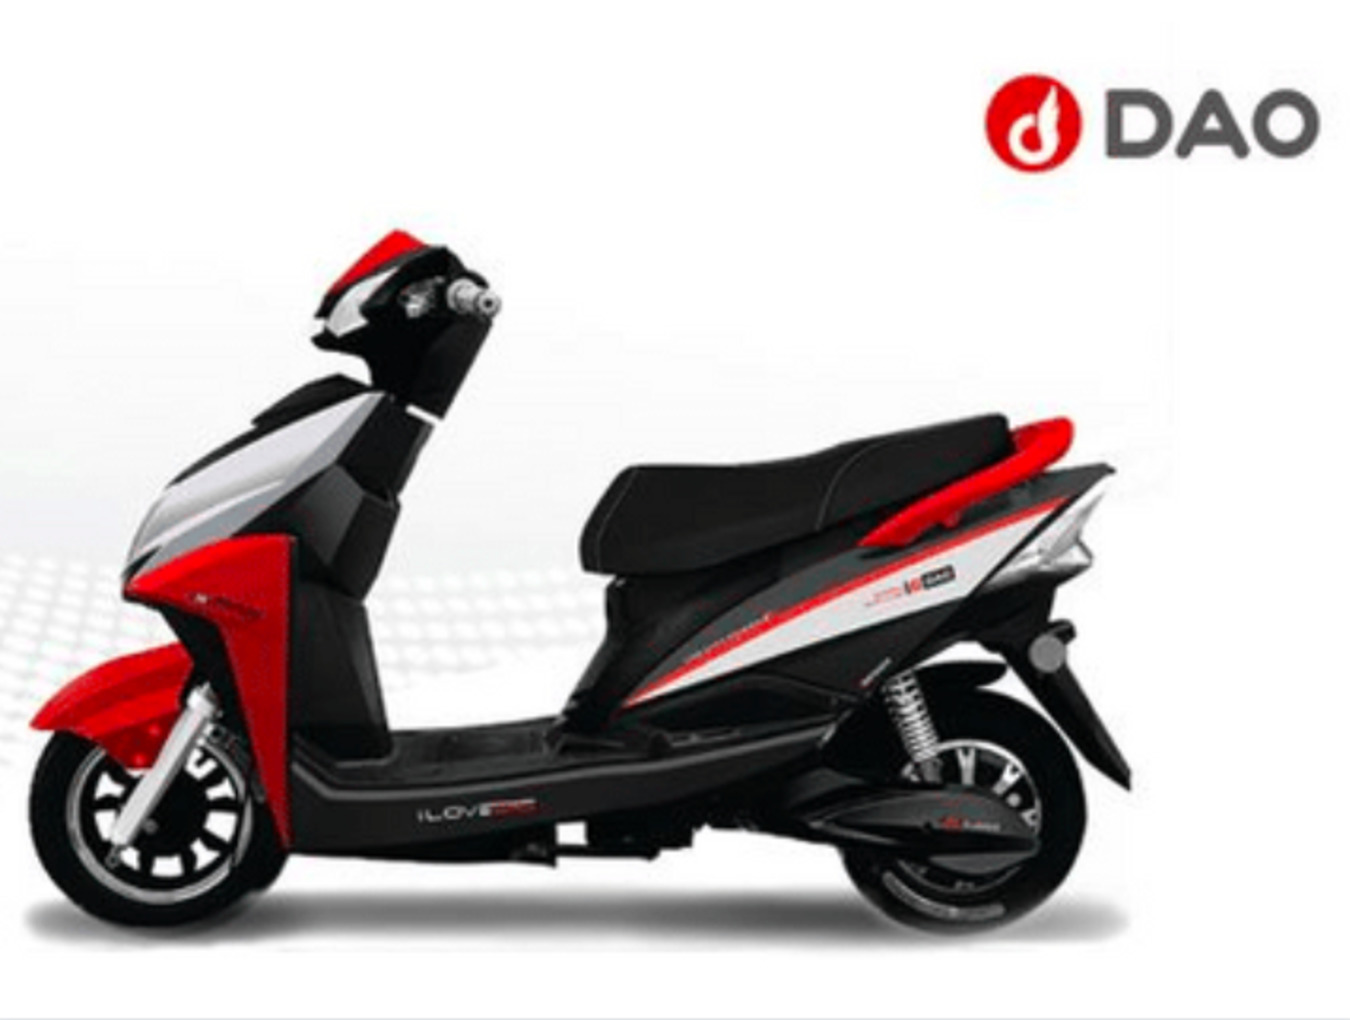 DAO EVTech Looks To Invest $100 Mn To Enter Indian Ebike Space